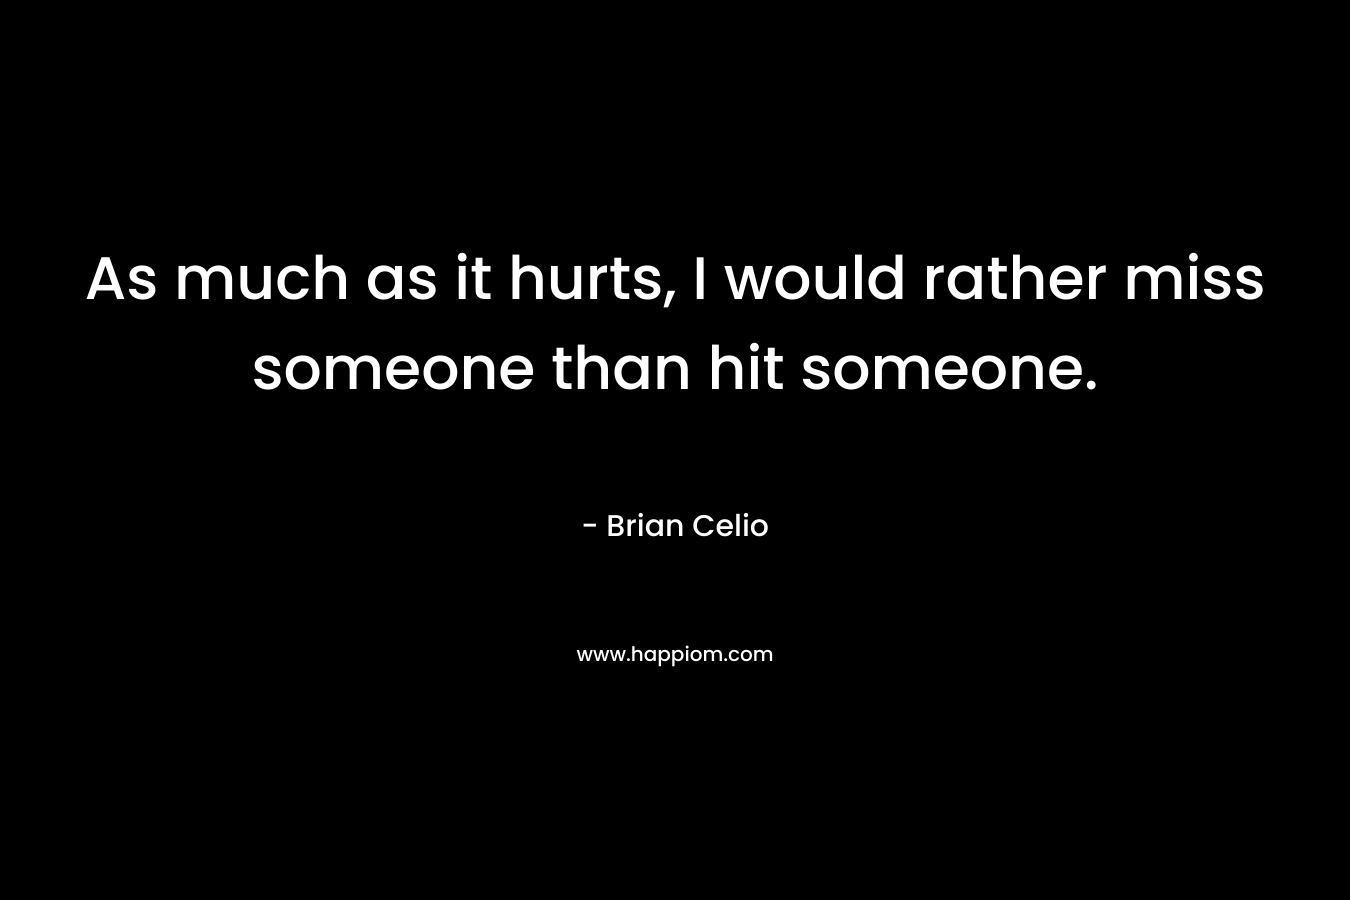 As much as it hurts, I would rather miss someone than hit someone.